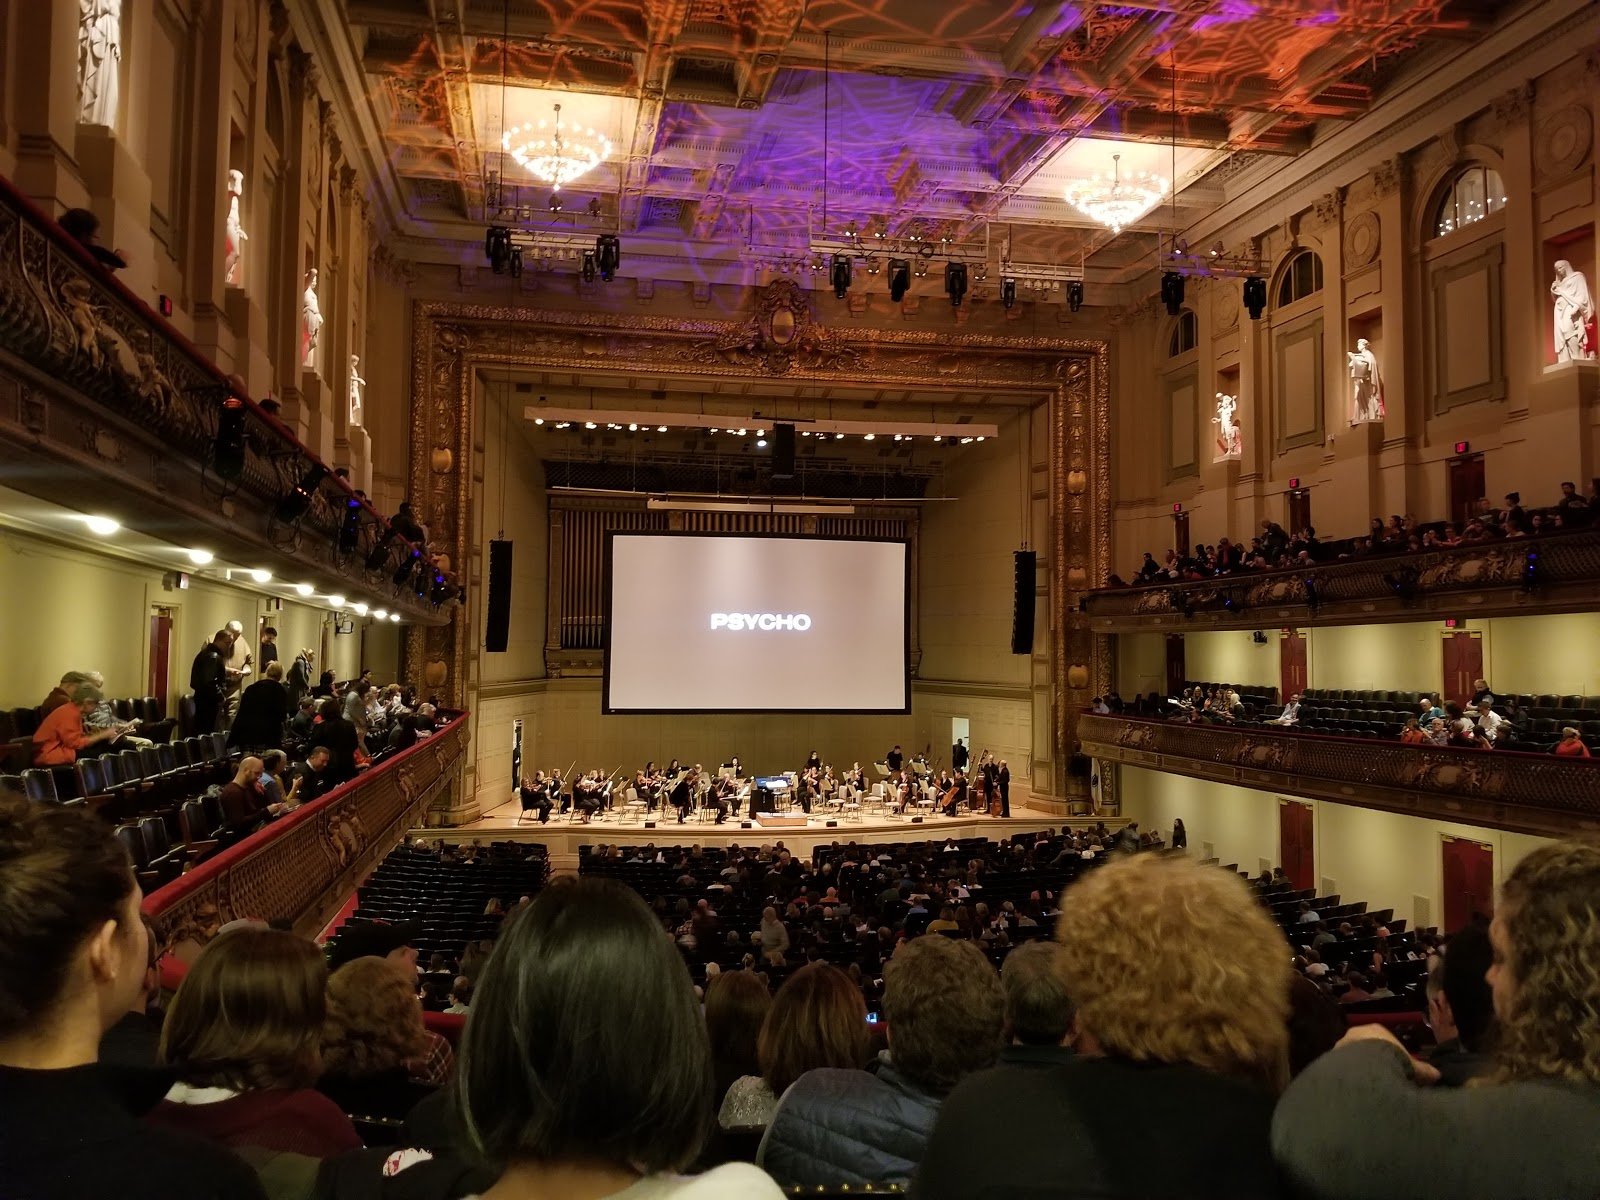 the movie psycho being shown at symphony hall